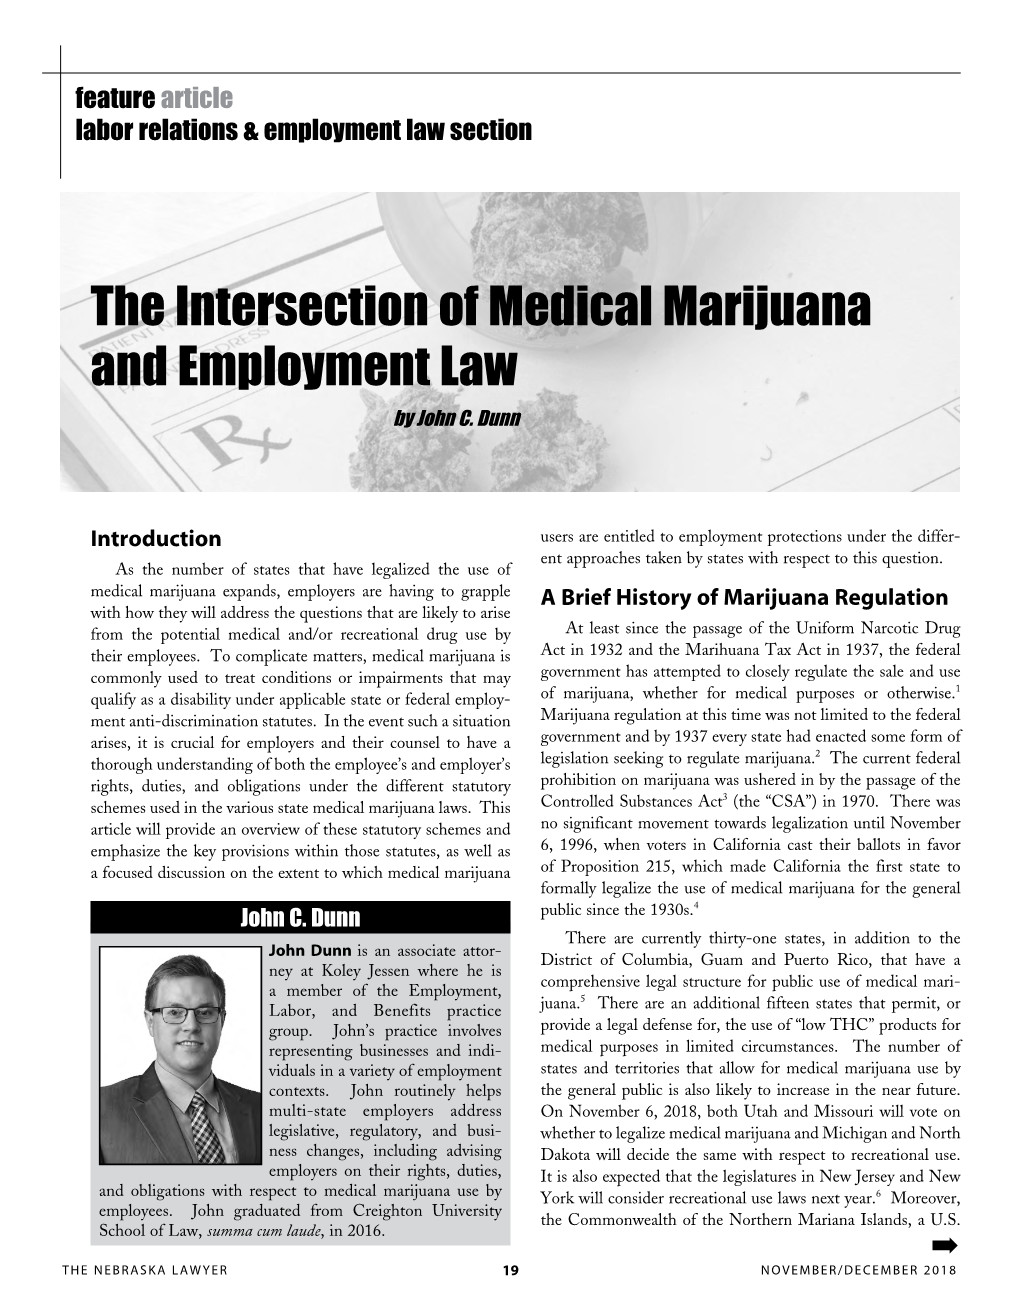 The Intersection of Medical Marijuana and Employment Law by John C